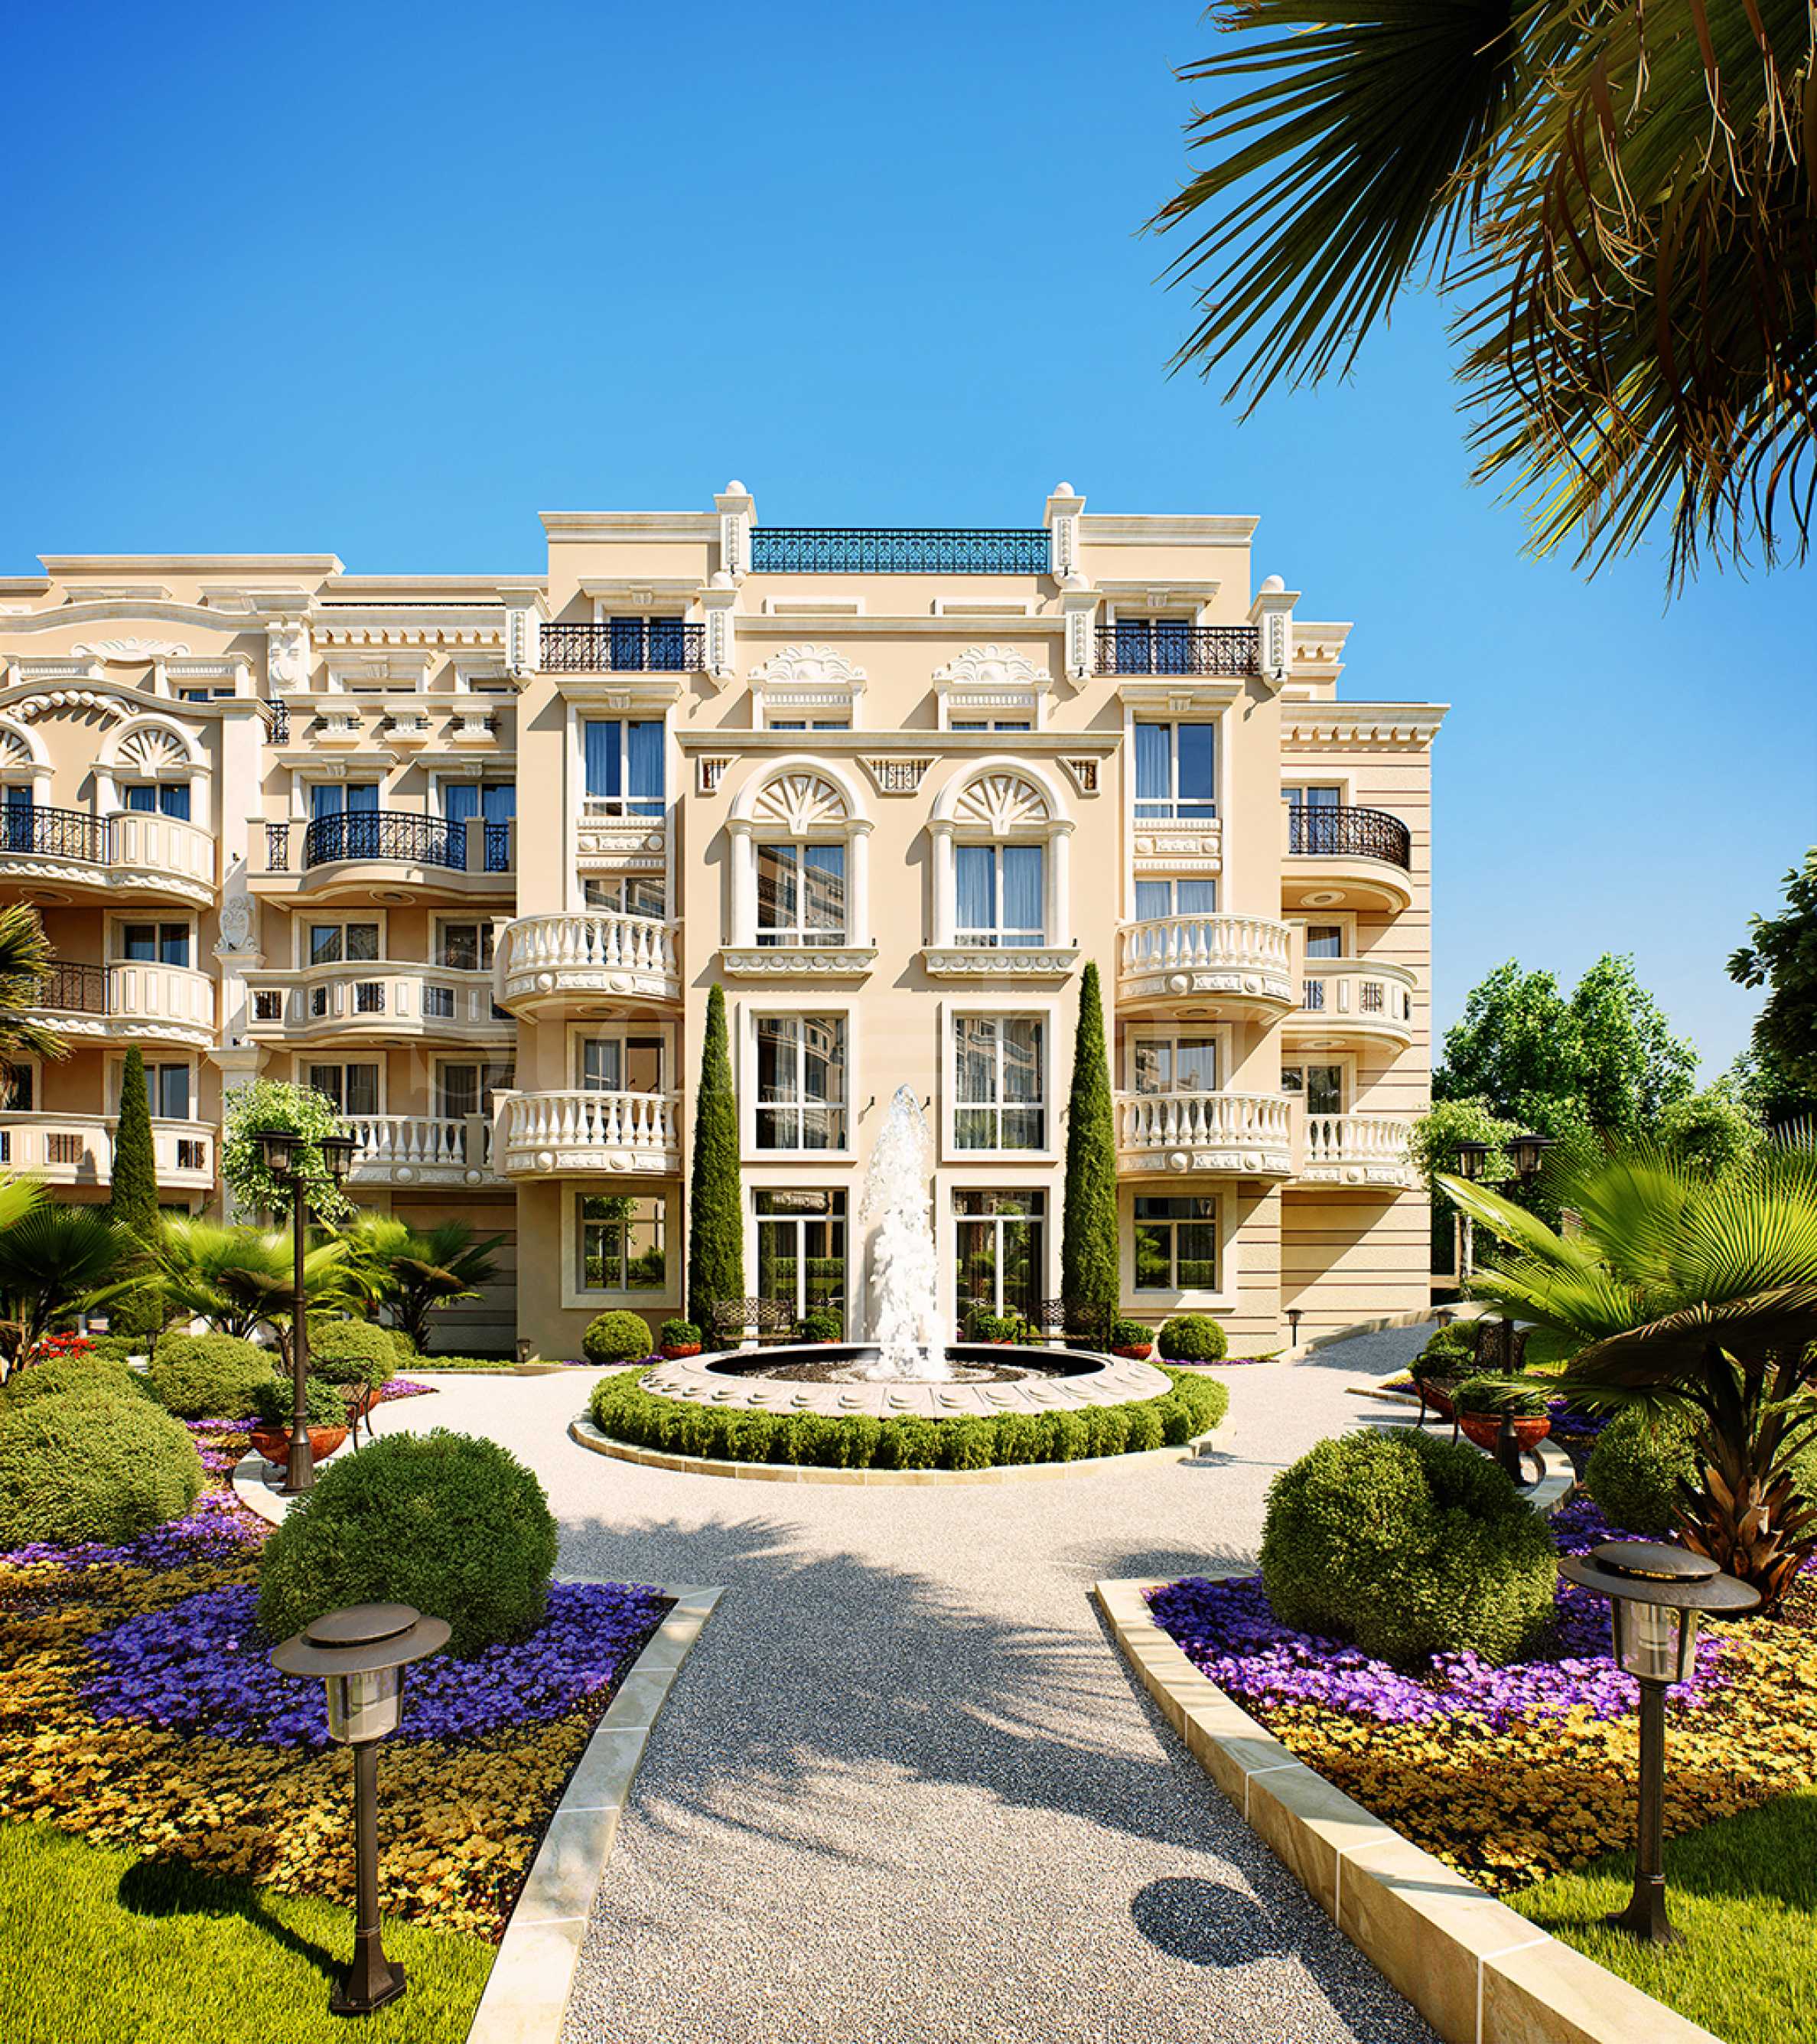 Luxury complex with boutique apartments and townhouses1 - Stonehard